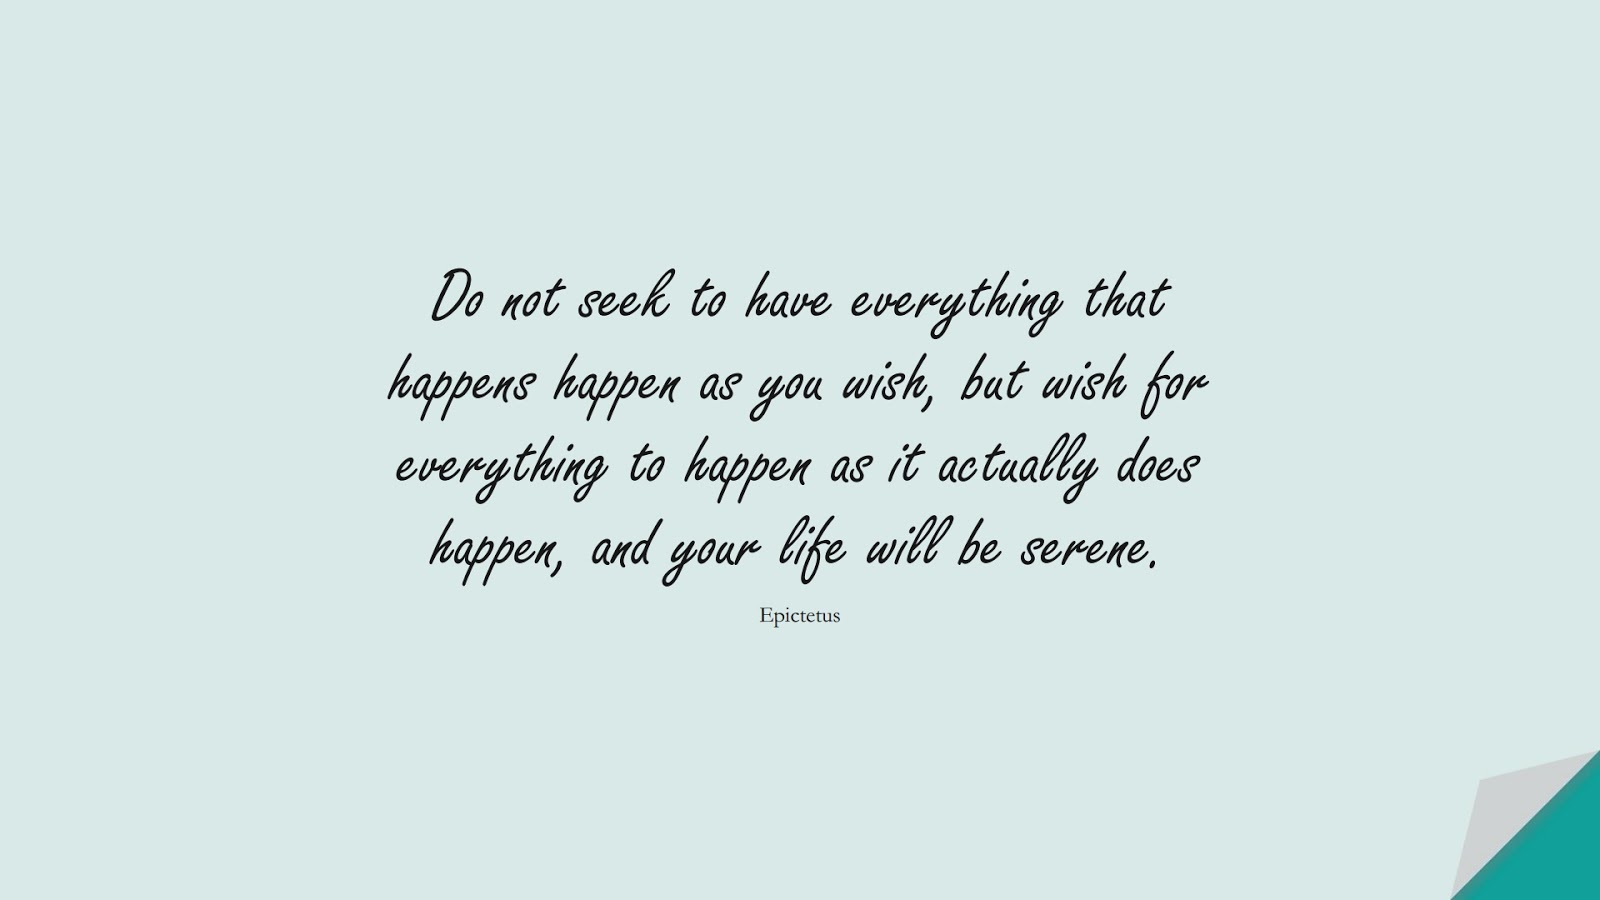 Do not seek to have everything that happens happen as you wish, but wish for everything to happen as it actually does happen, and your life will be serene. (Epictetus);  #StressQuotes